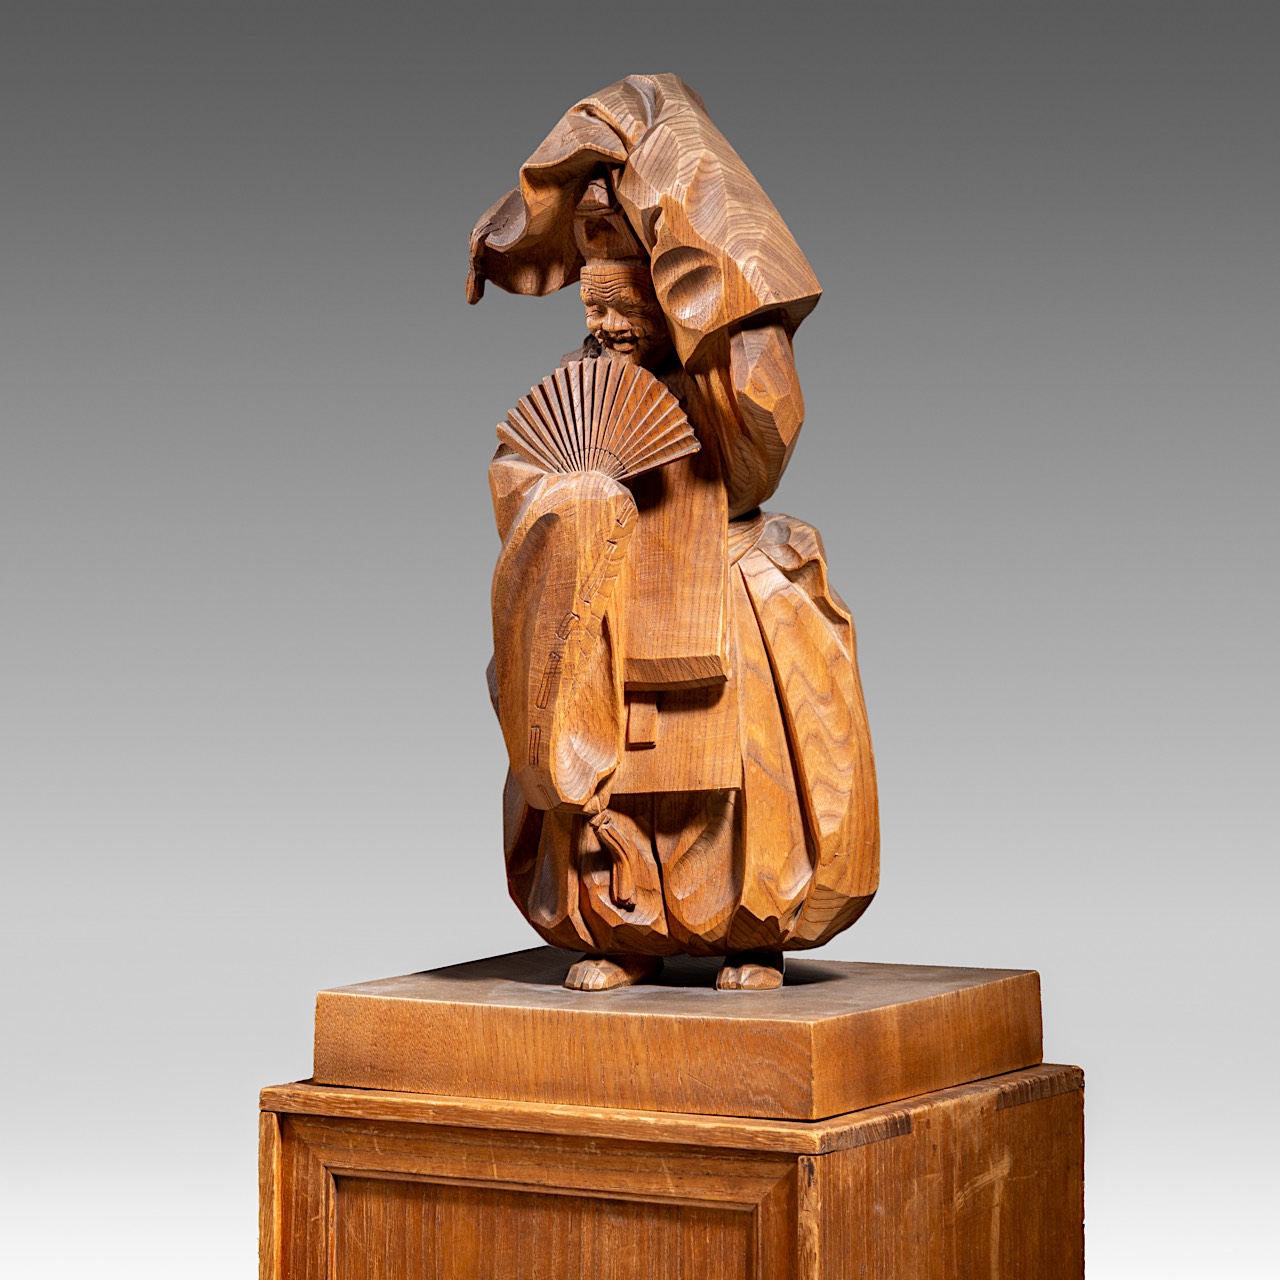 A Japanese cherrywood sculpture of a dancing man, signed Toshiaki Shimamura, total H 47 - 25,5 x 23 - Image 2 of 10